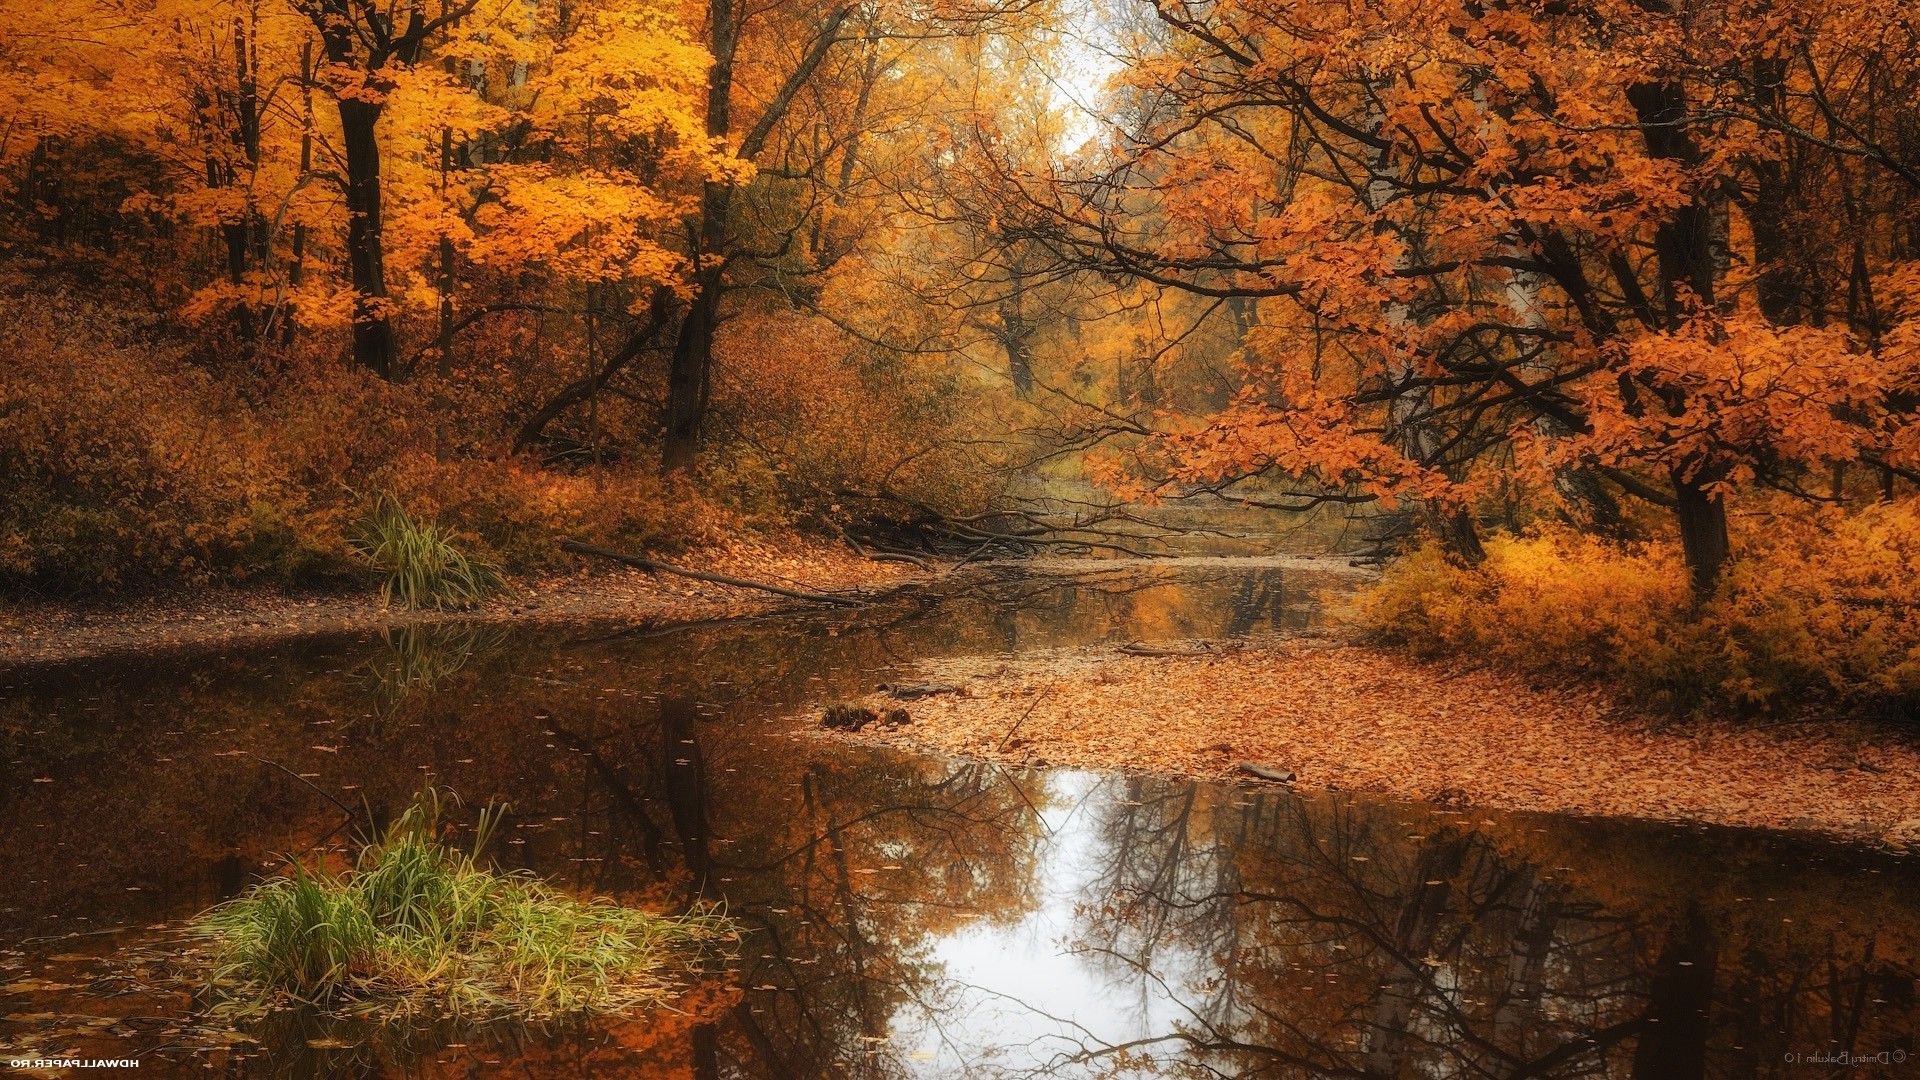 River In Autumn Wallpapers - Wallpaper Cave